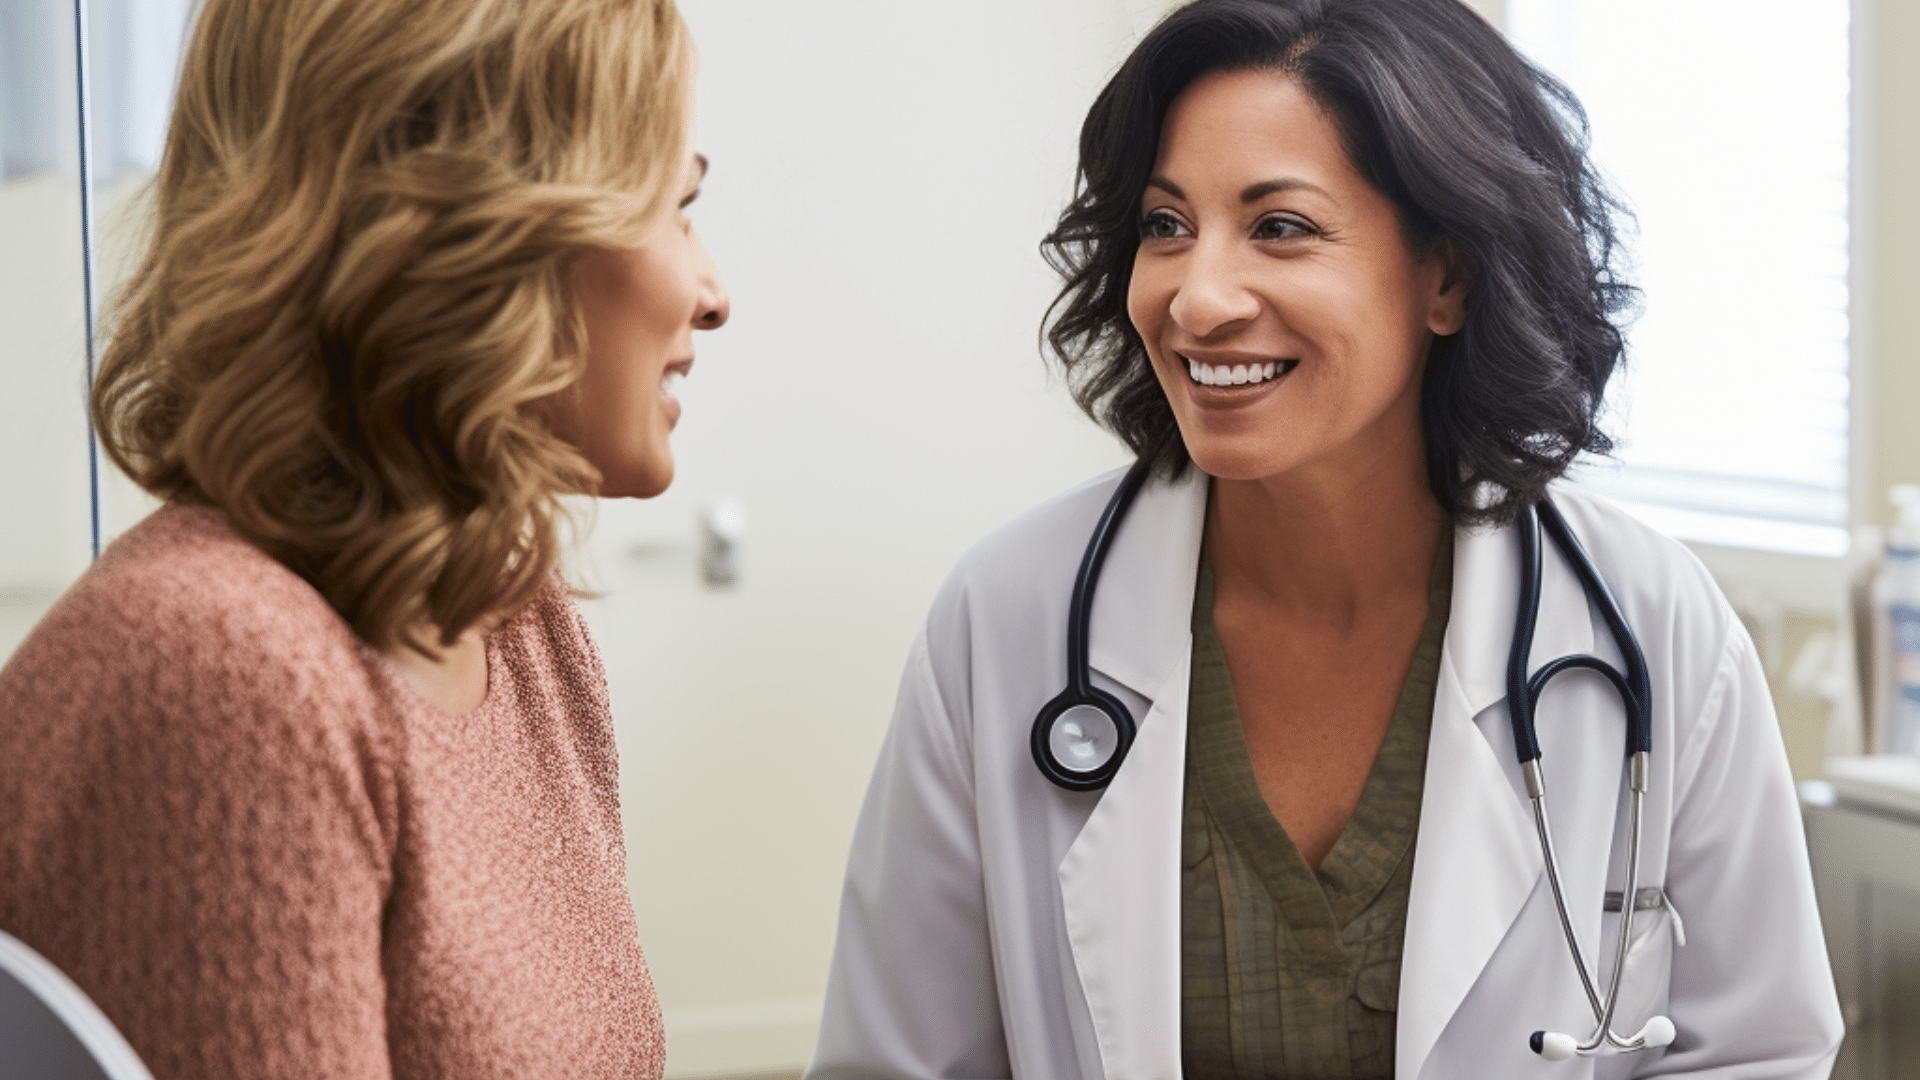 a doctor happily talking with a patient